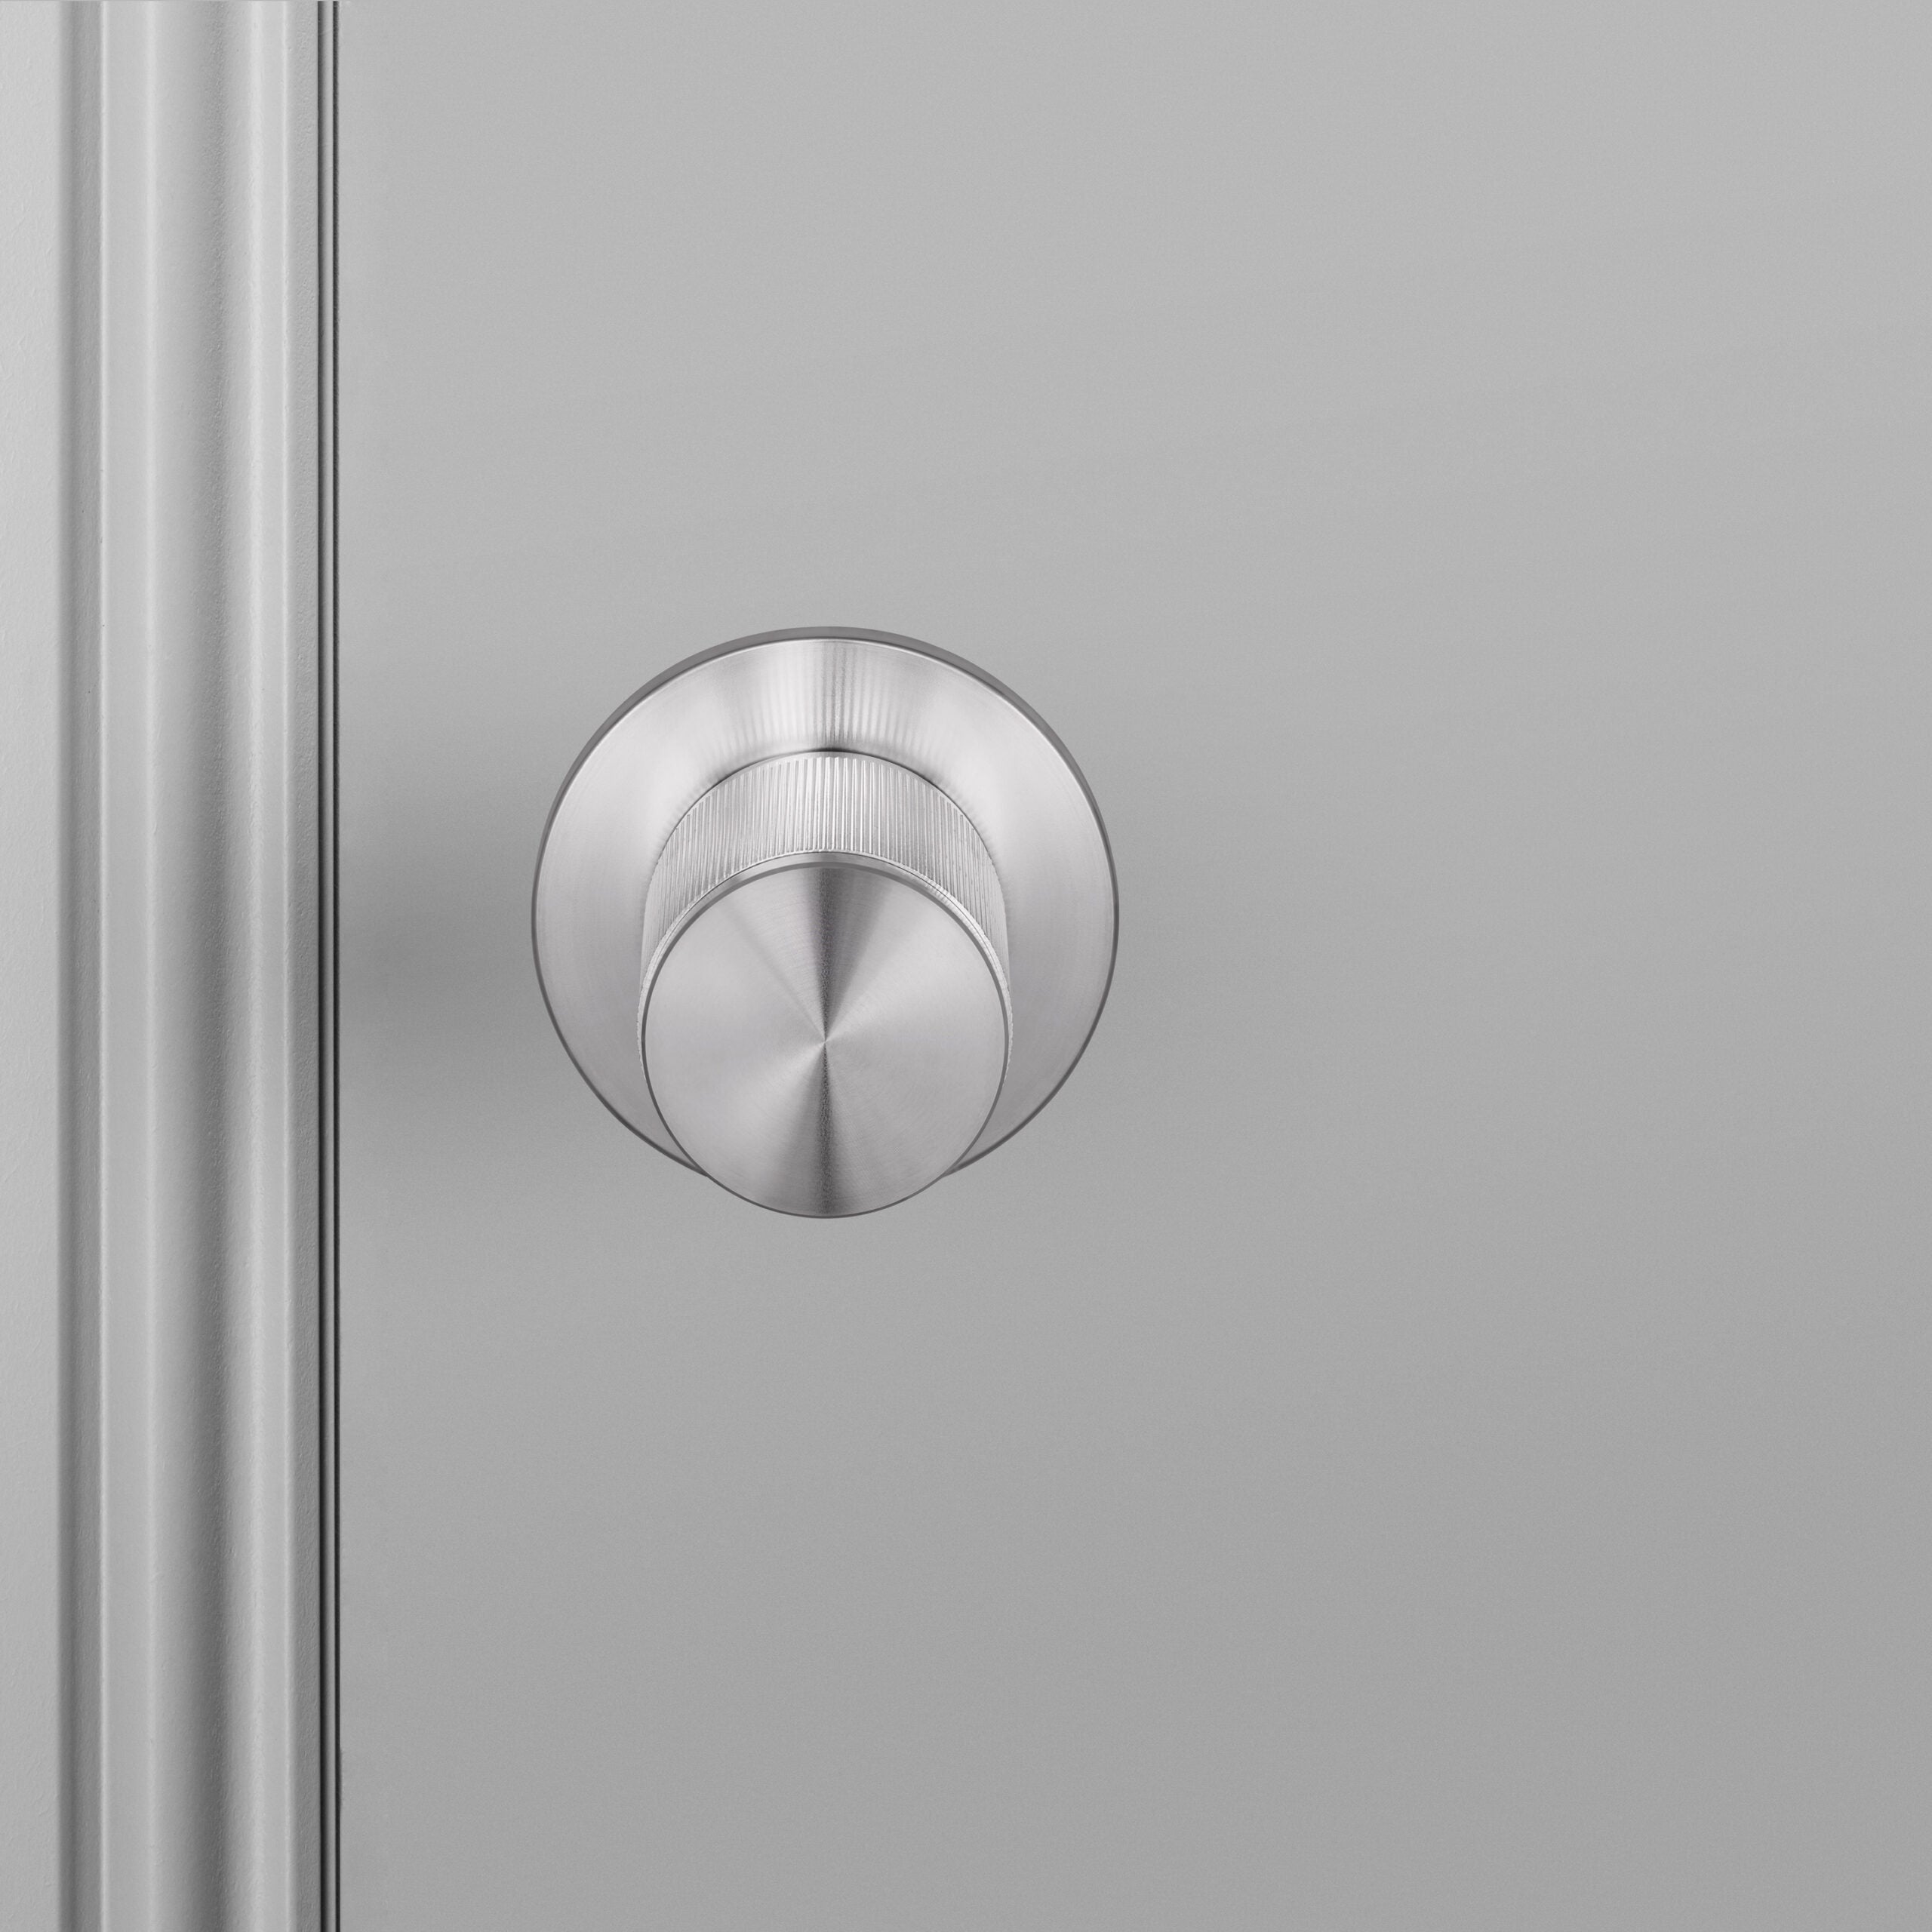 Buster + Punch Conventional Door Handle, Linear Design - PASSAGE TYPE